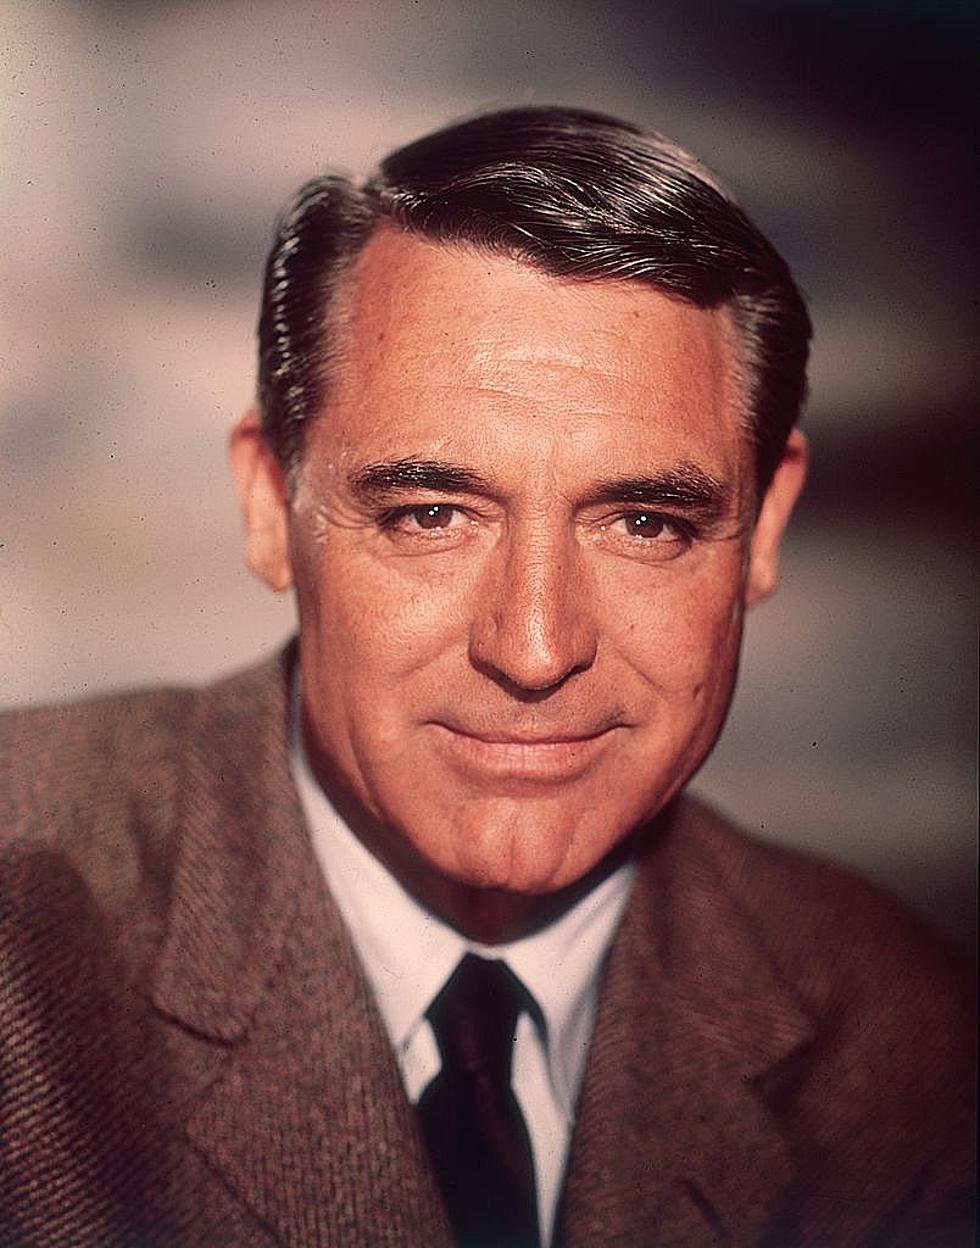 The Night Cary Grant Died in Davenport